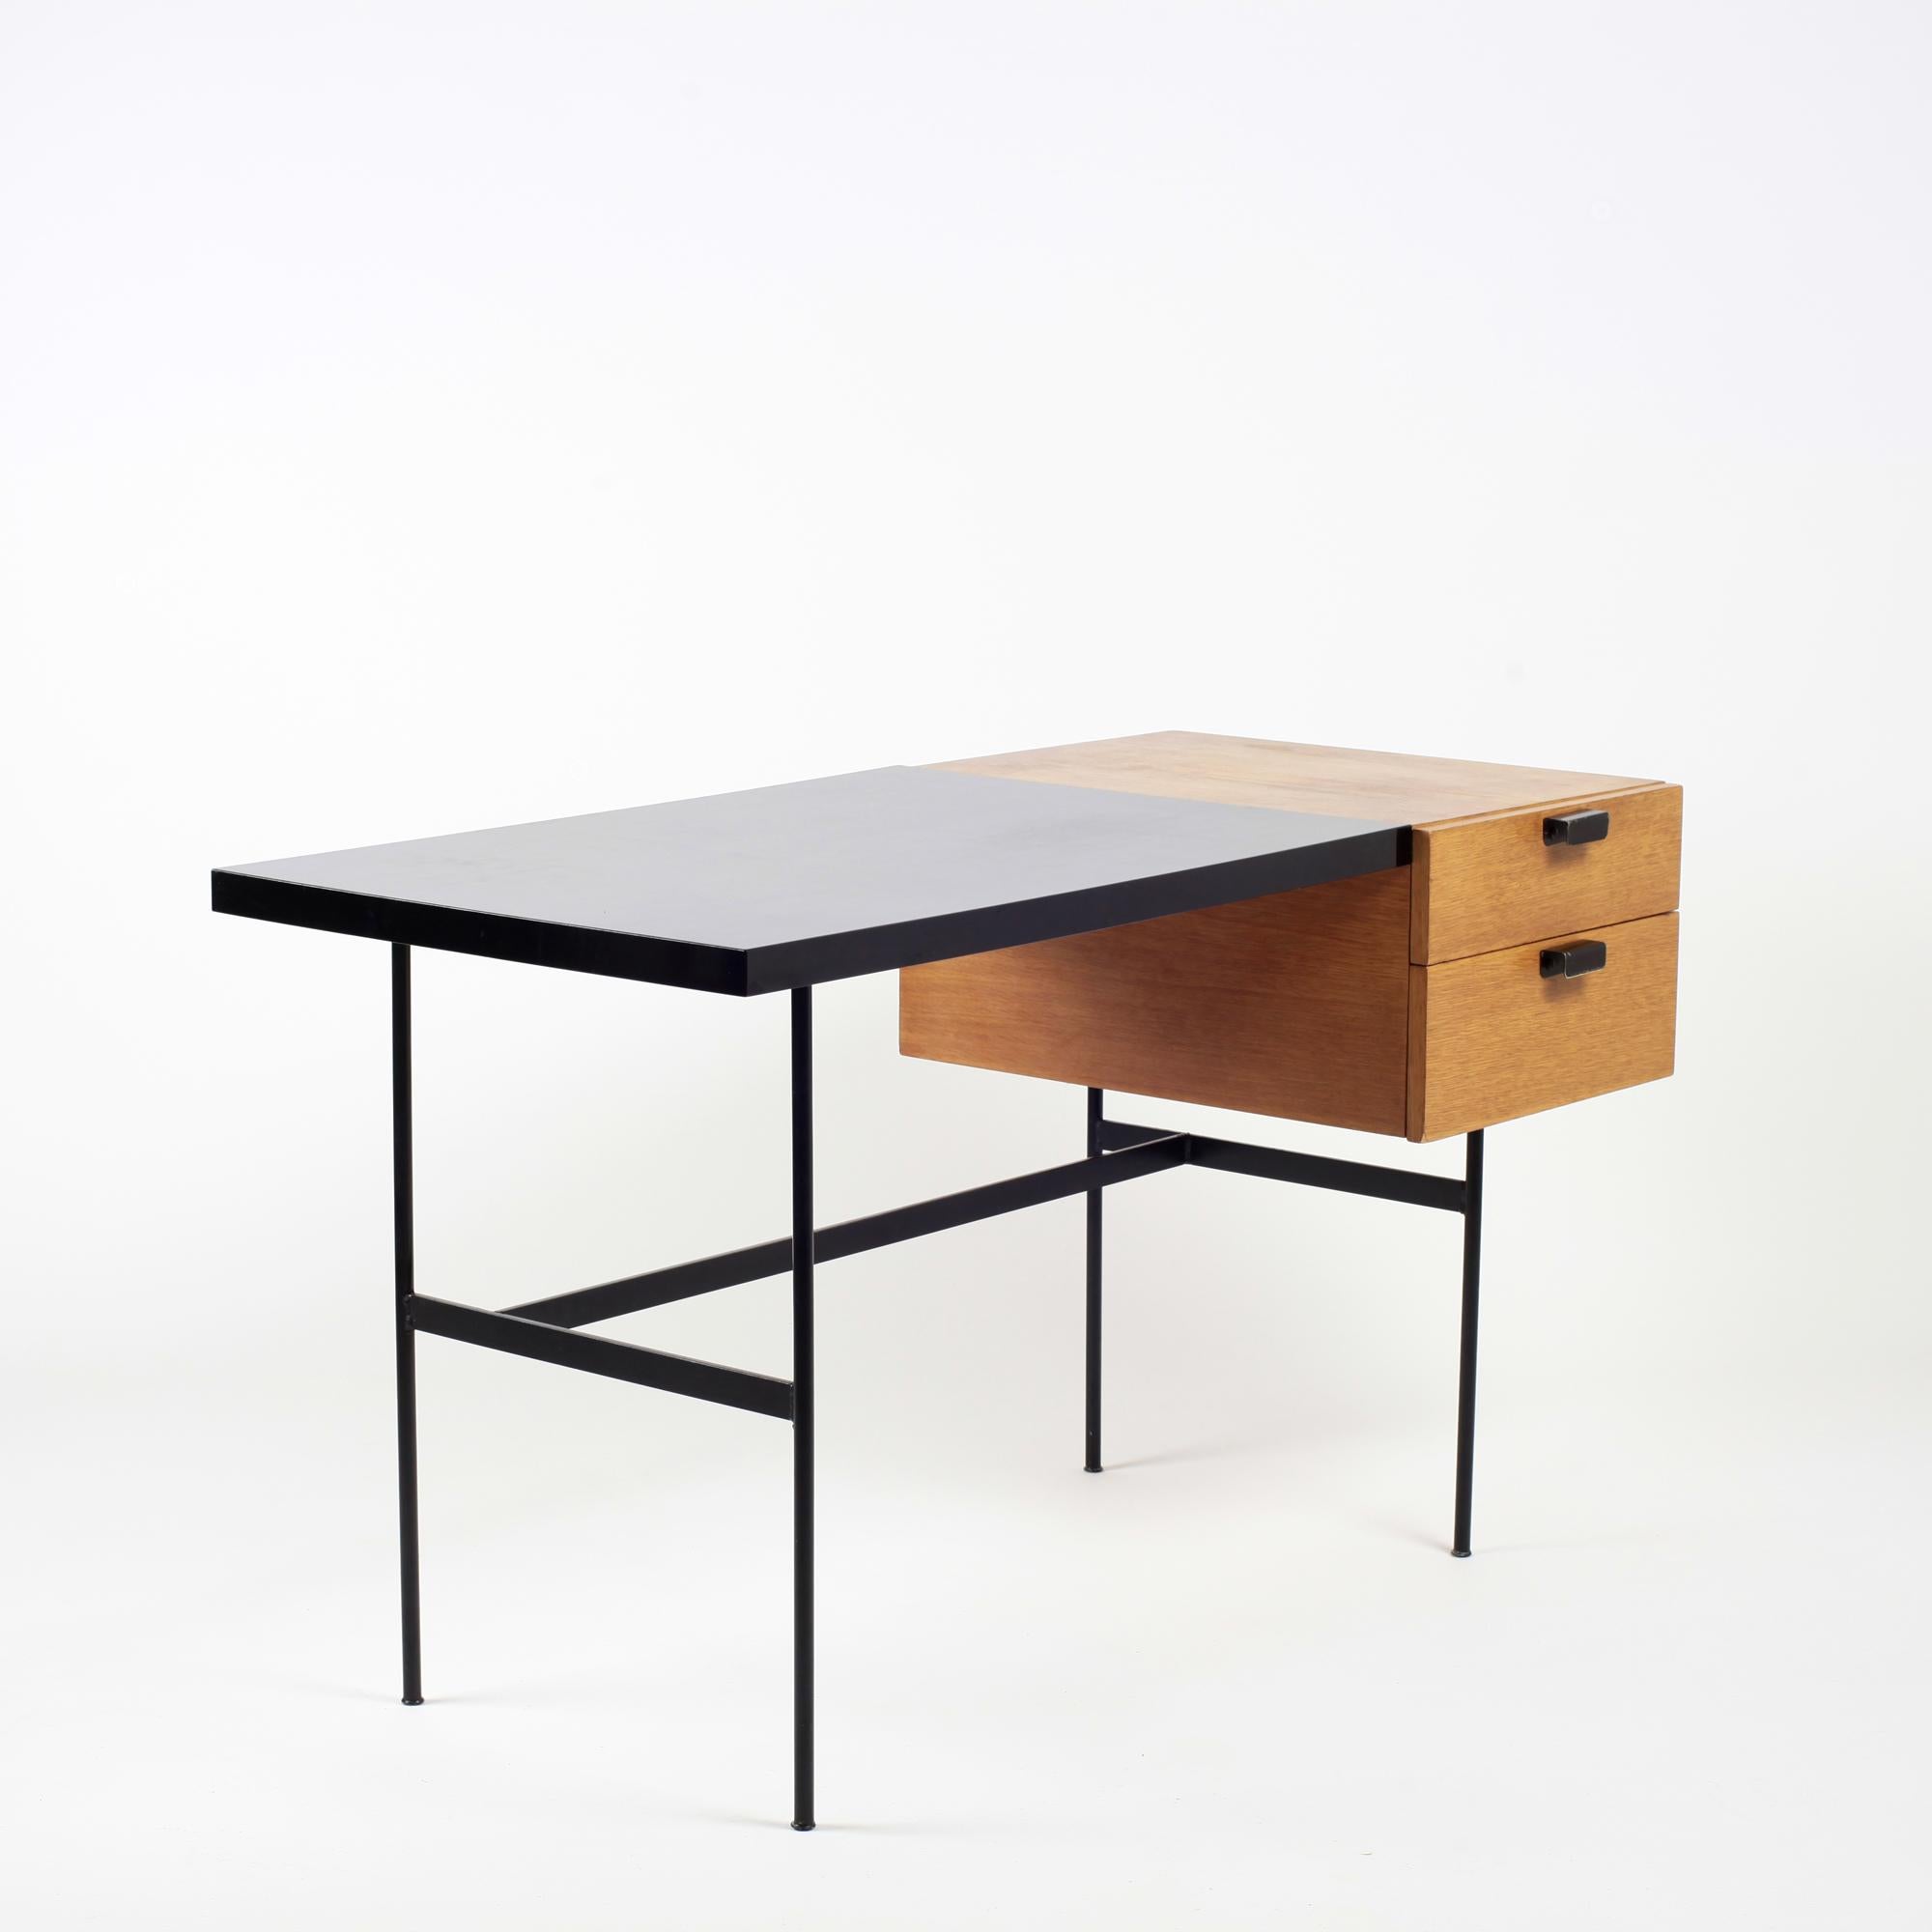 Iconic CM141 desk designed by Pierre Paulin for Thonet France in 1954.
Black lacquered metal base and handles. Oak veneer. Black formica top.
Beautiful patina.
Bibliography: Catherine Geel 